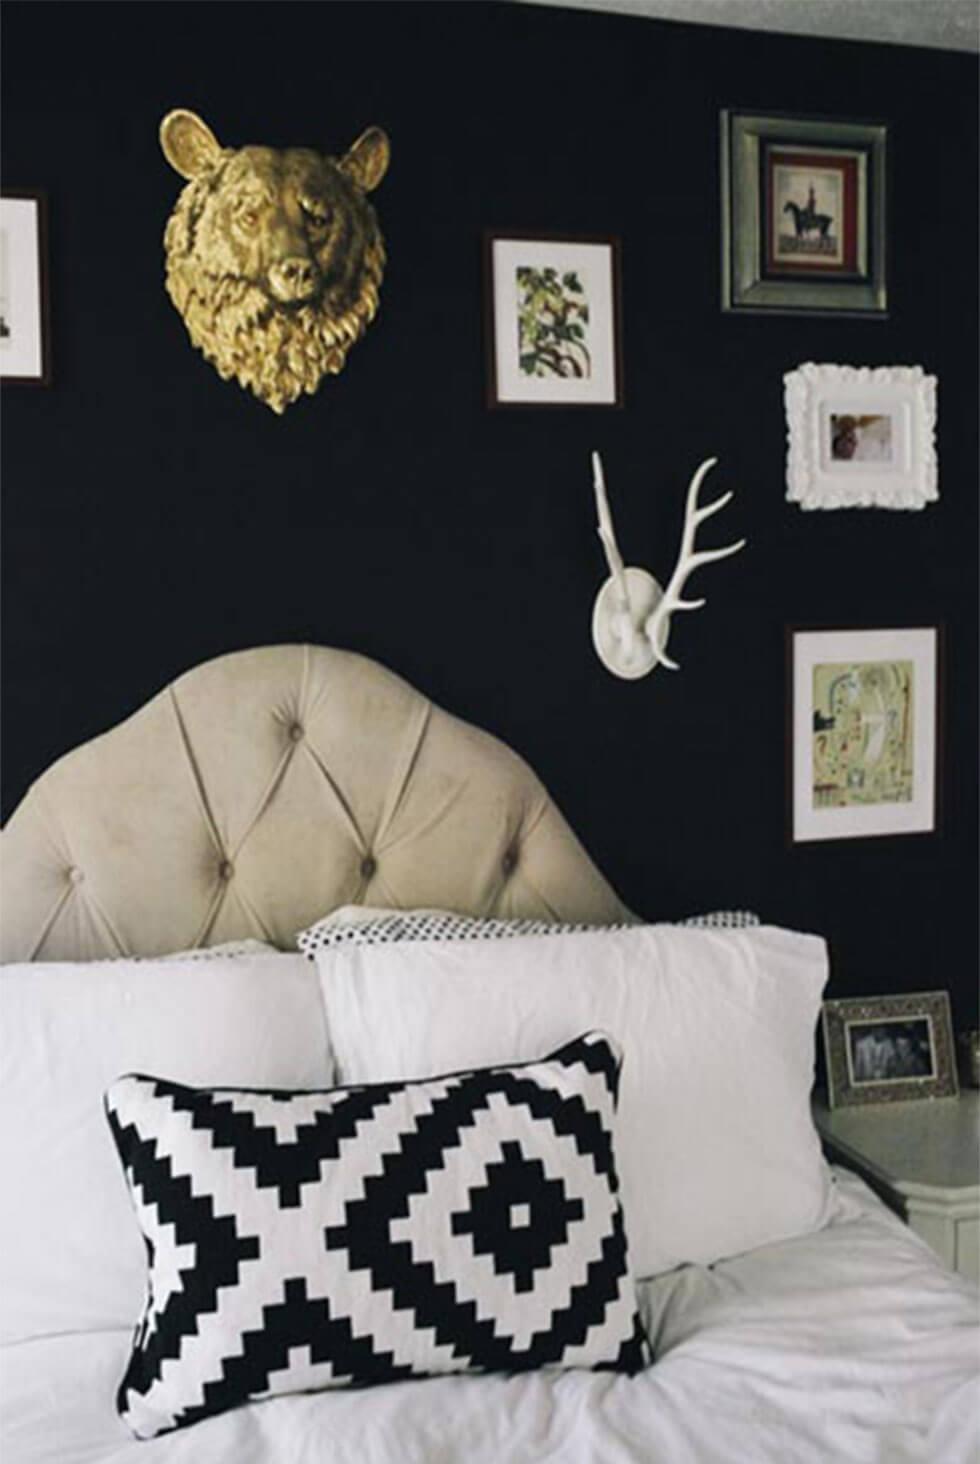 Quirky black bedroom with art and wall decor, printed cushion and upholstered headboard